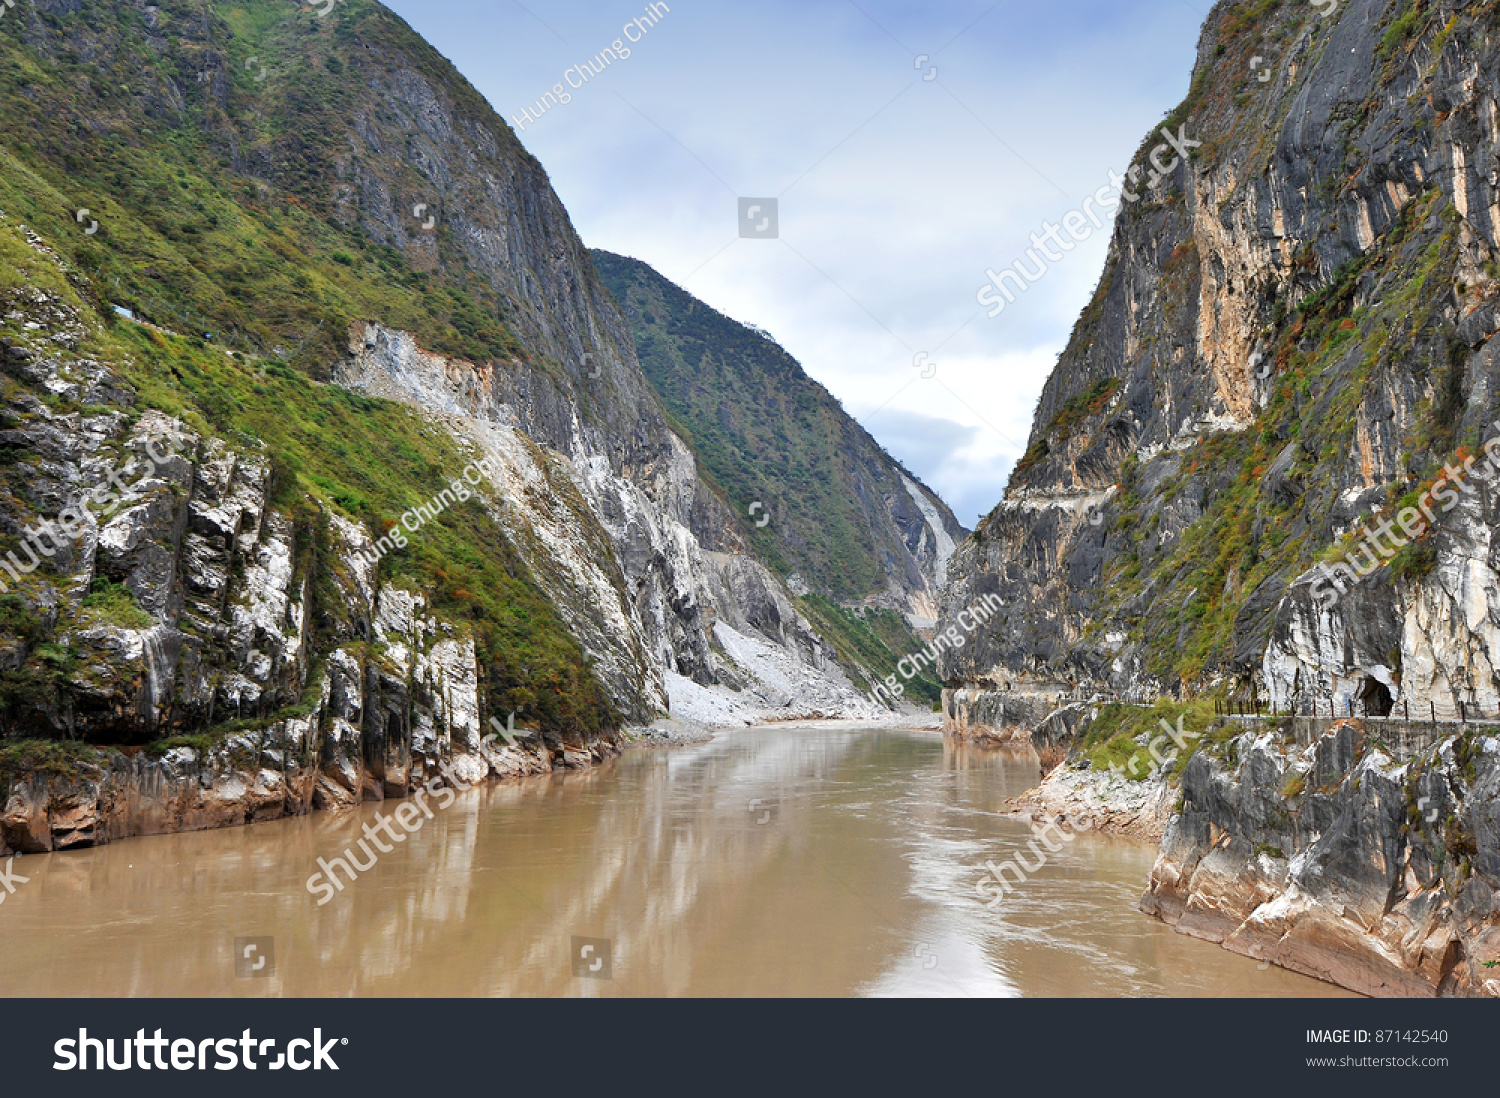 World's deepest gorge: Hutiaoxia in China (Tiger leaping gorge) #87142540